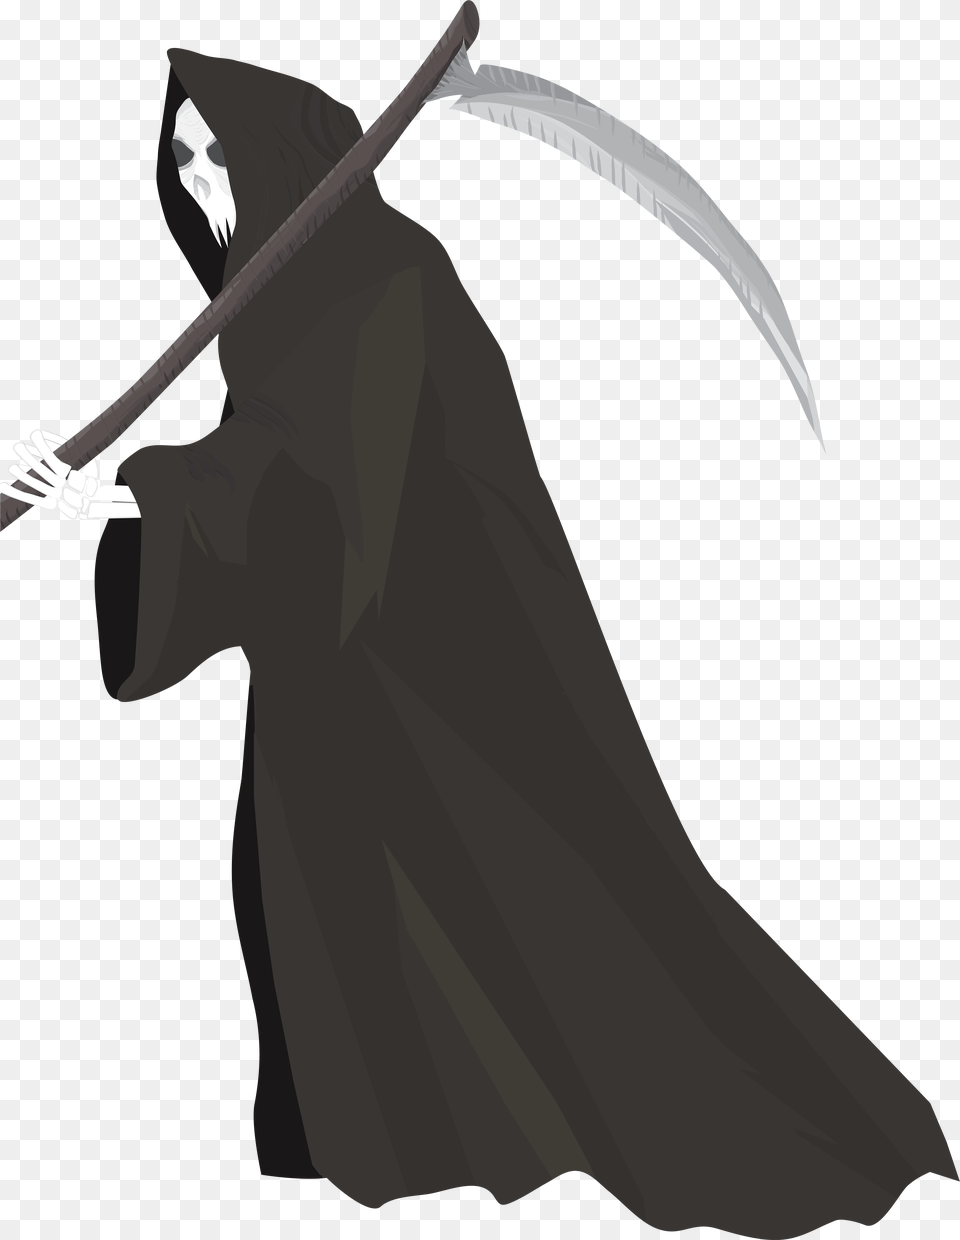 Grim Reaper Download, Fashion, Sword, Weapon, Blade Png